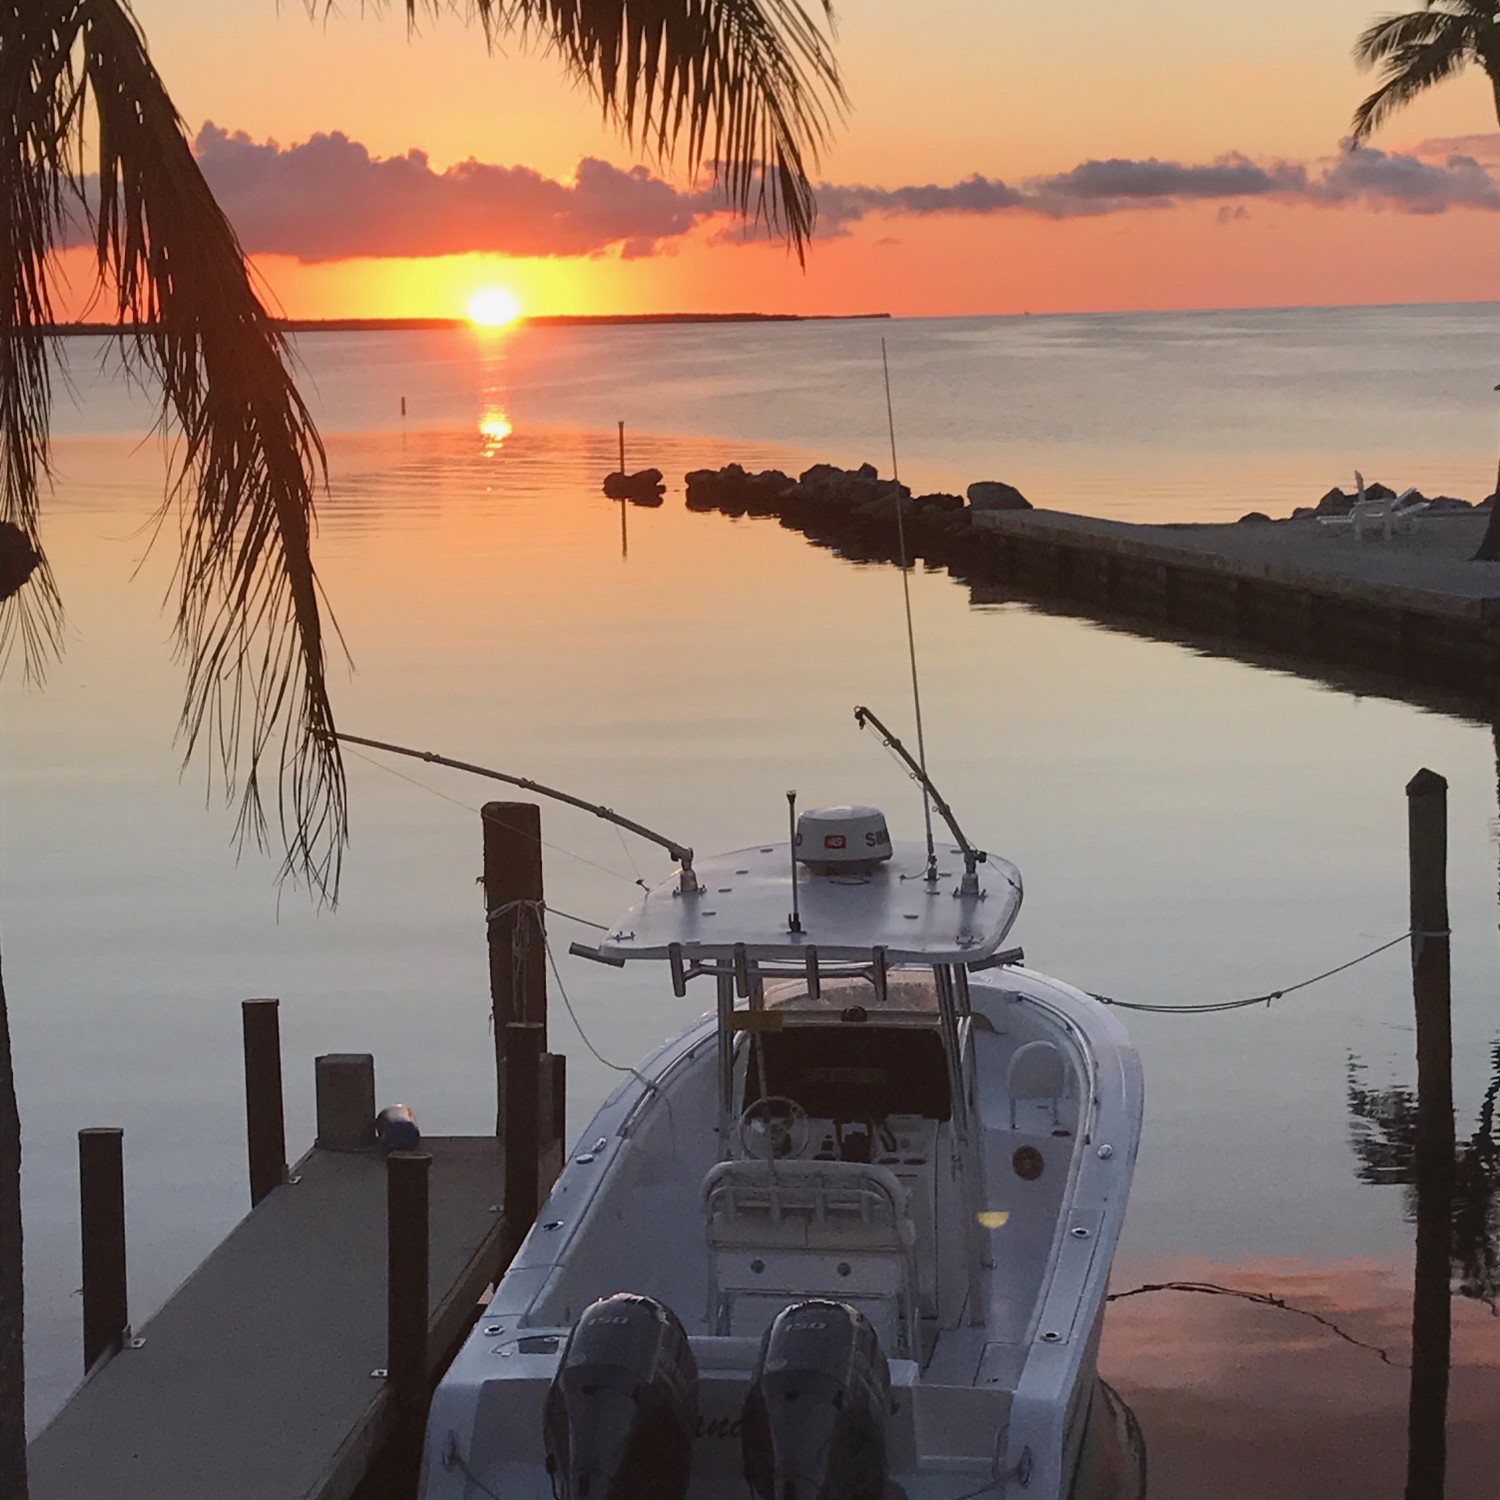 Another great sunset after another great day of fishing in Islamorada. End of another fantastic day on Island Soul.